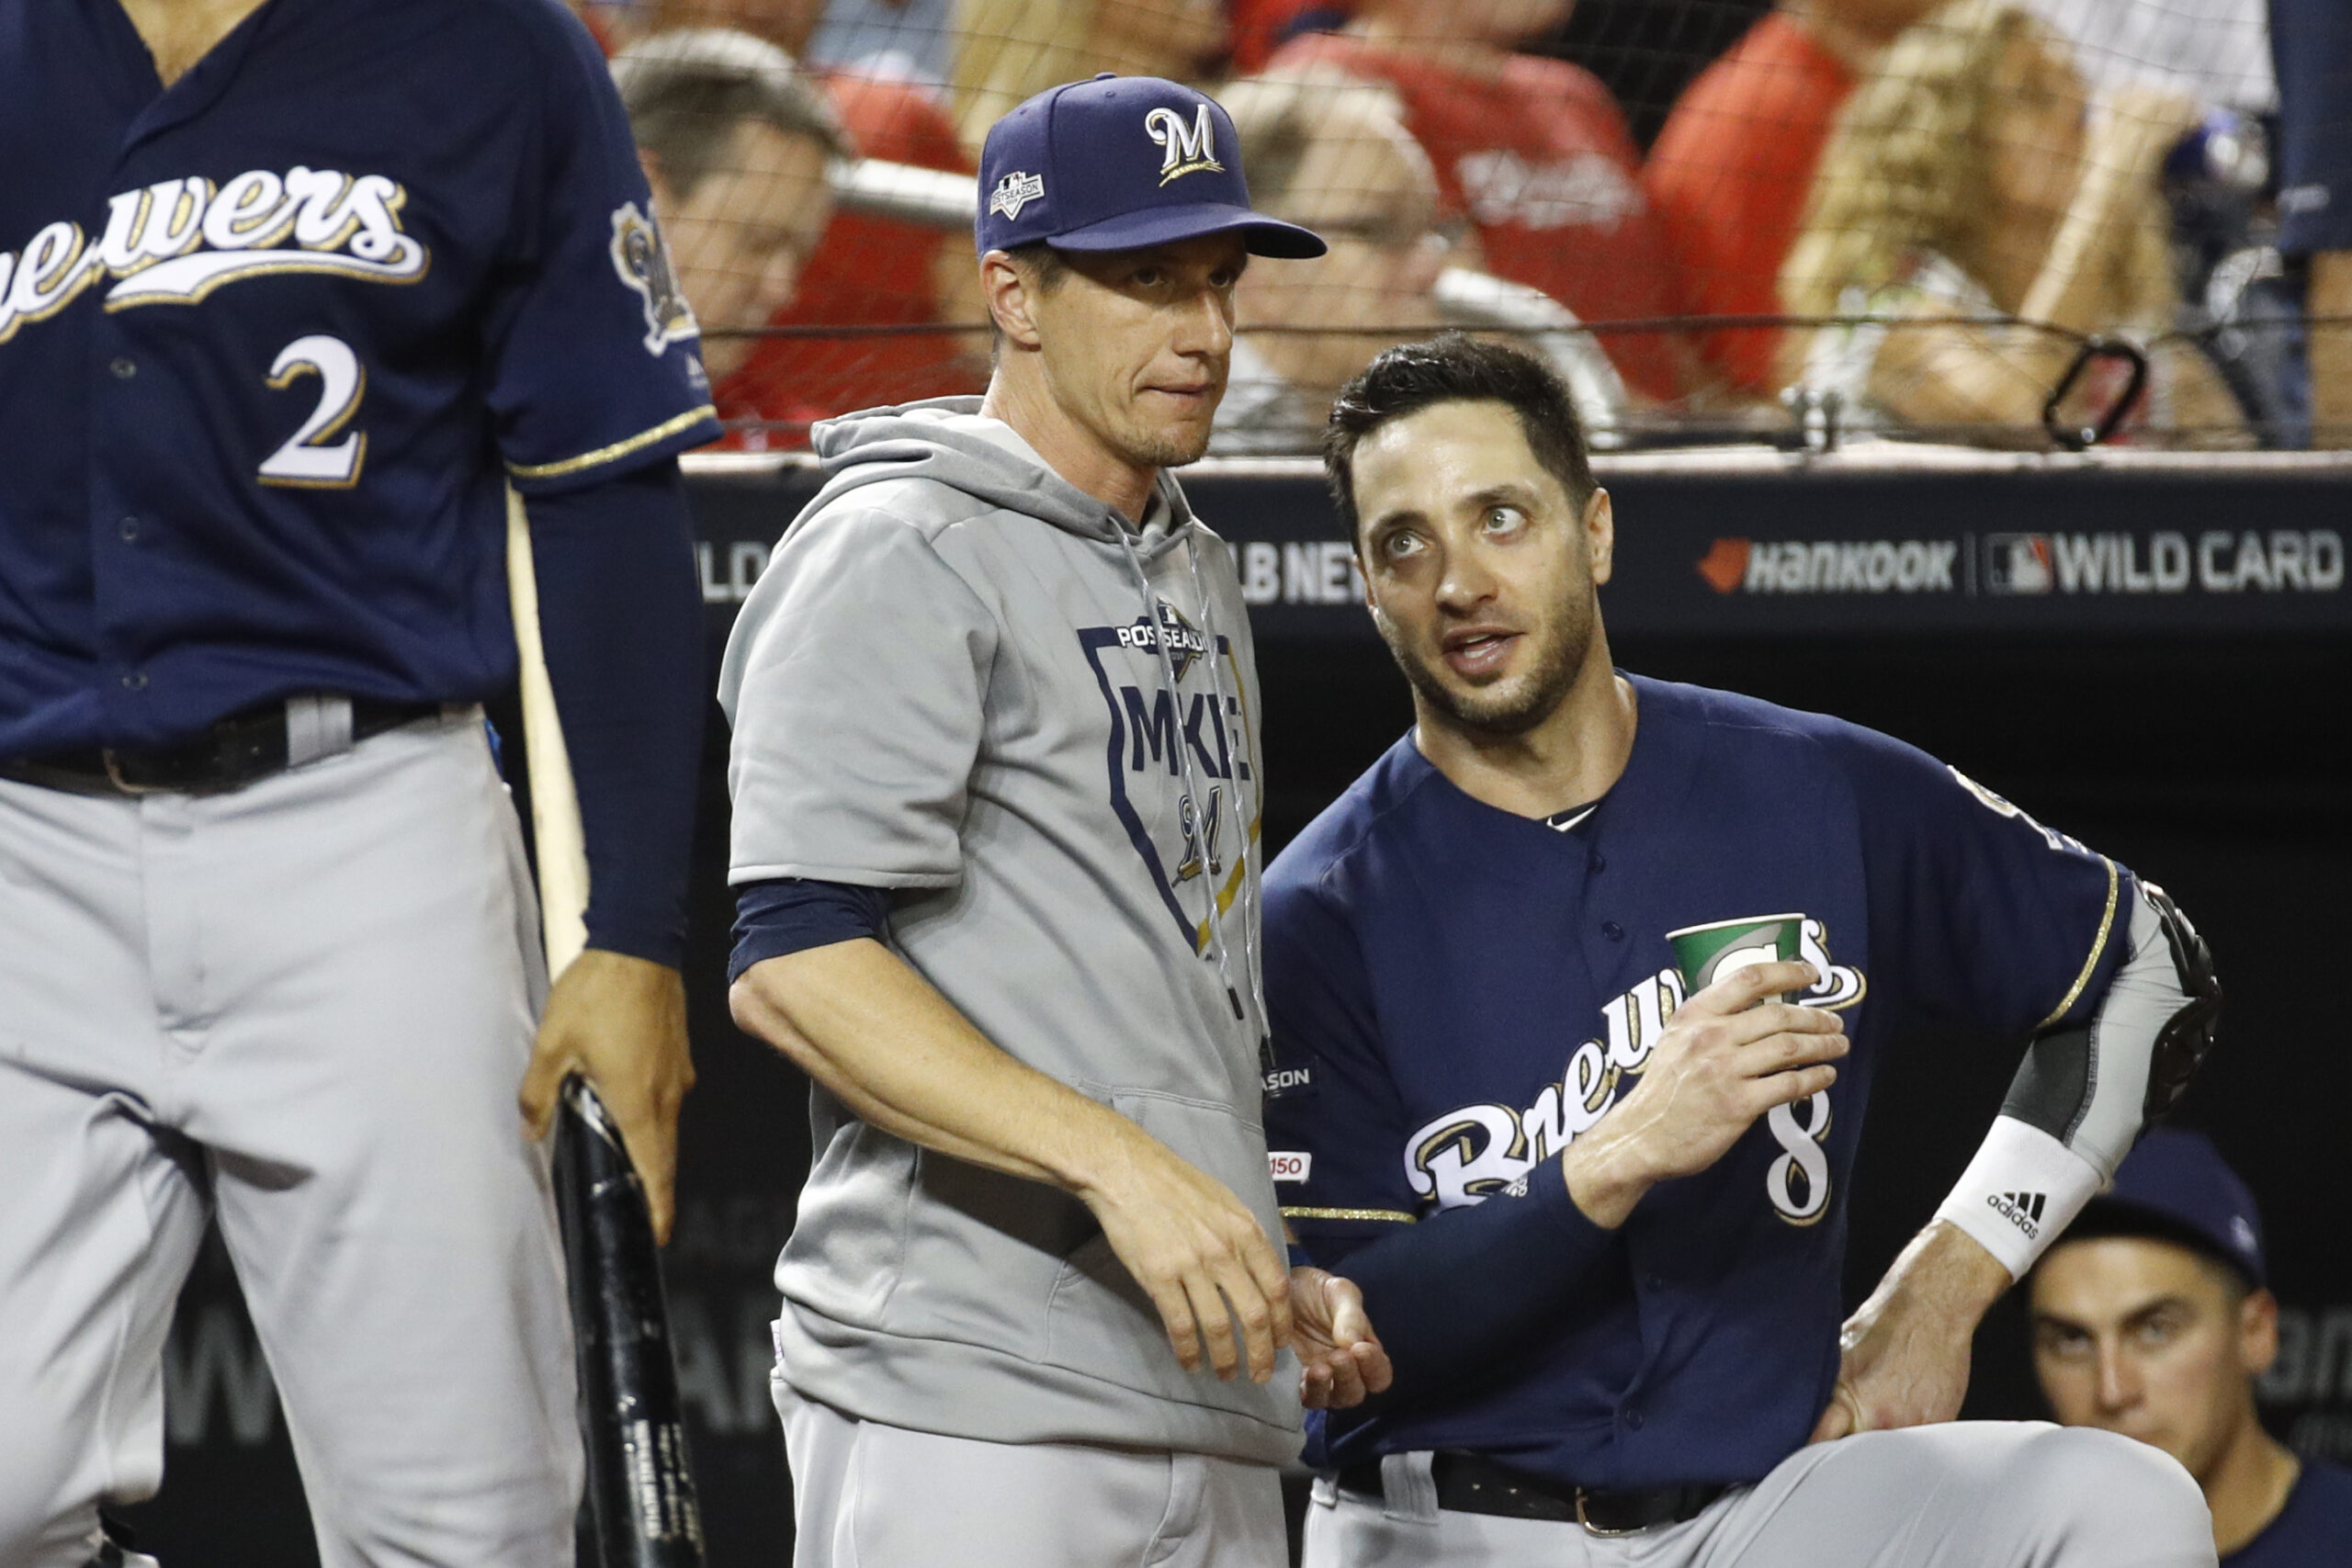 Ryan Braun May Stay With Brewers Past 2020